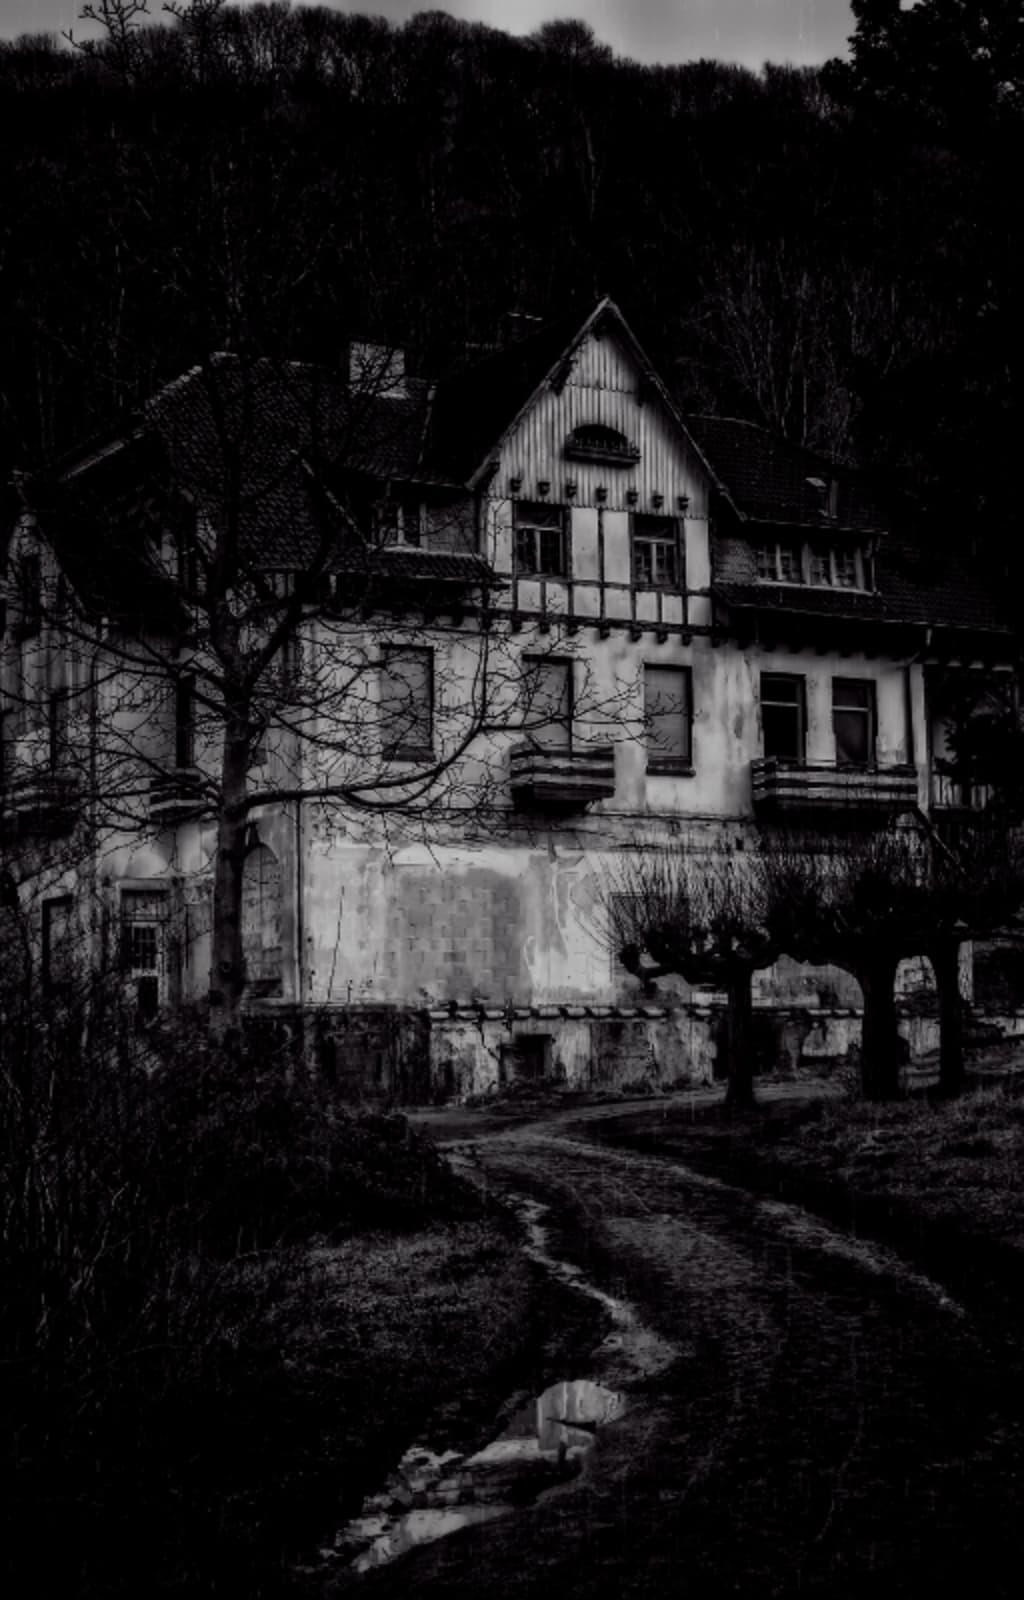 The Abandoned Asylum: A Terrifying Tale of Shadows and Secrets